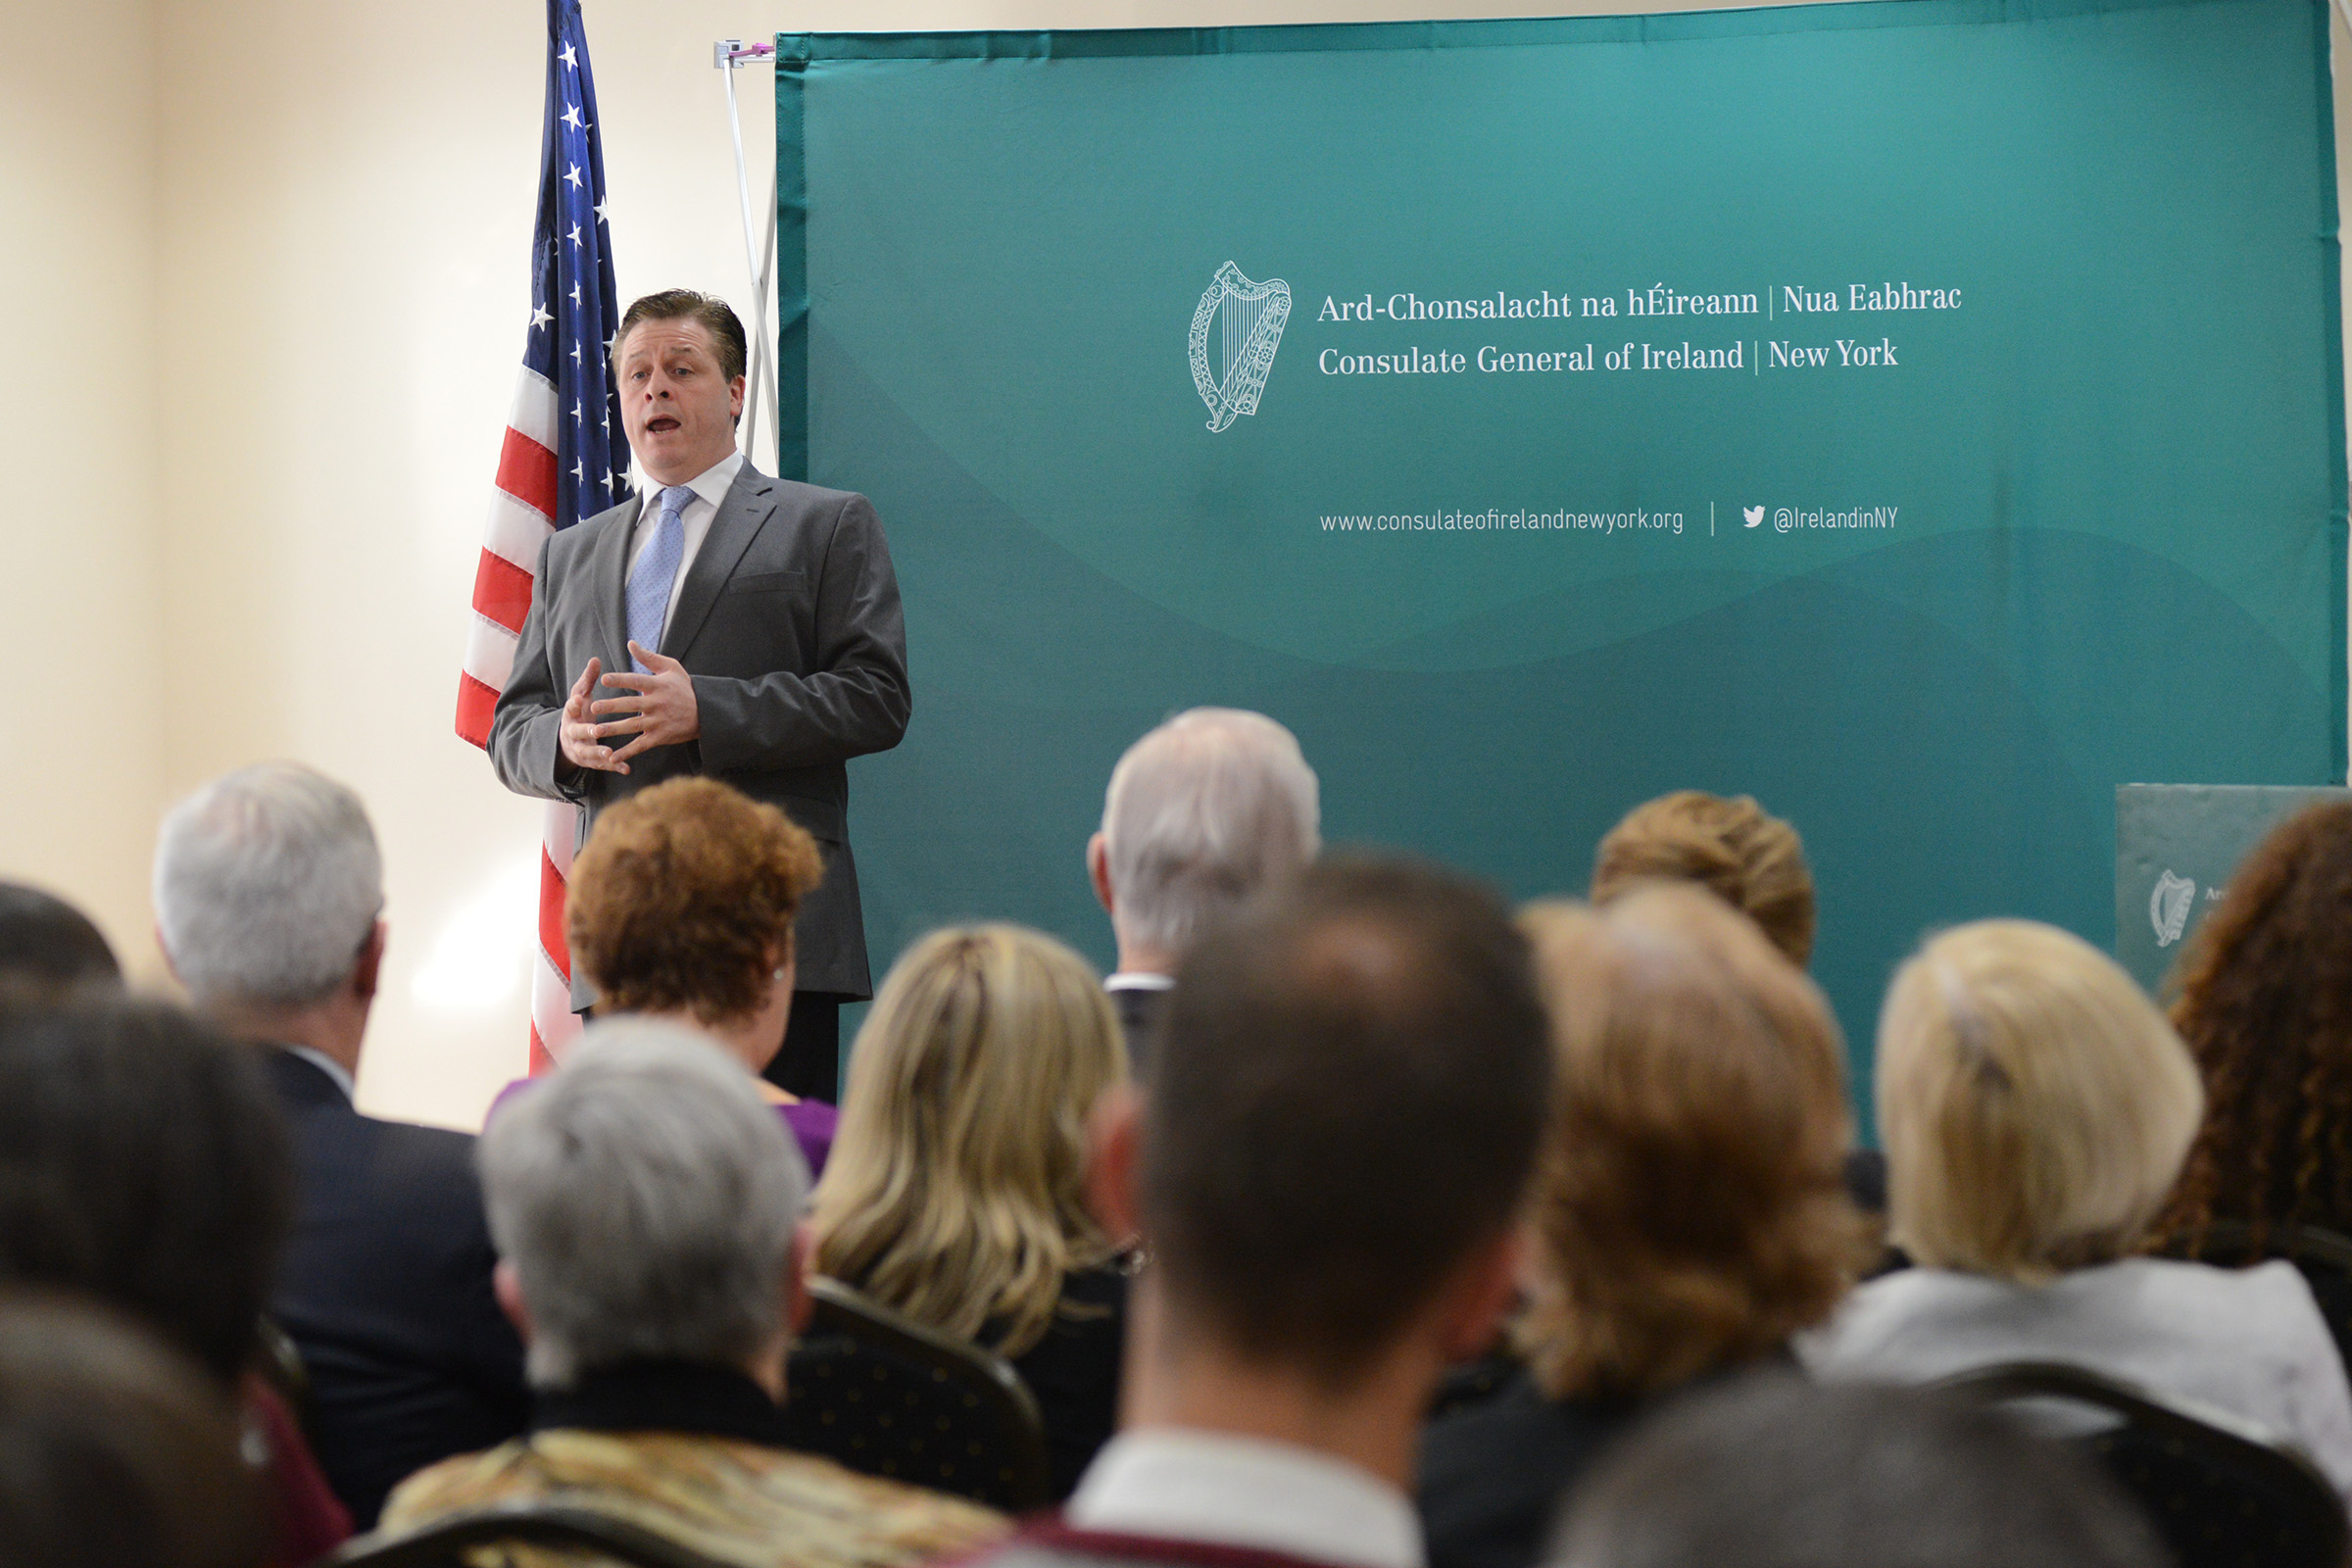 Irish Tenor Anthony Kearns sings at the event with Minister for Foreign Affairs and Trade Charlie Flanagan launching the 2016 Centenary Programme in the United States of America today in New York at the Consulate of Ireland. (Photo: James Higgins)